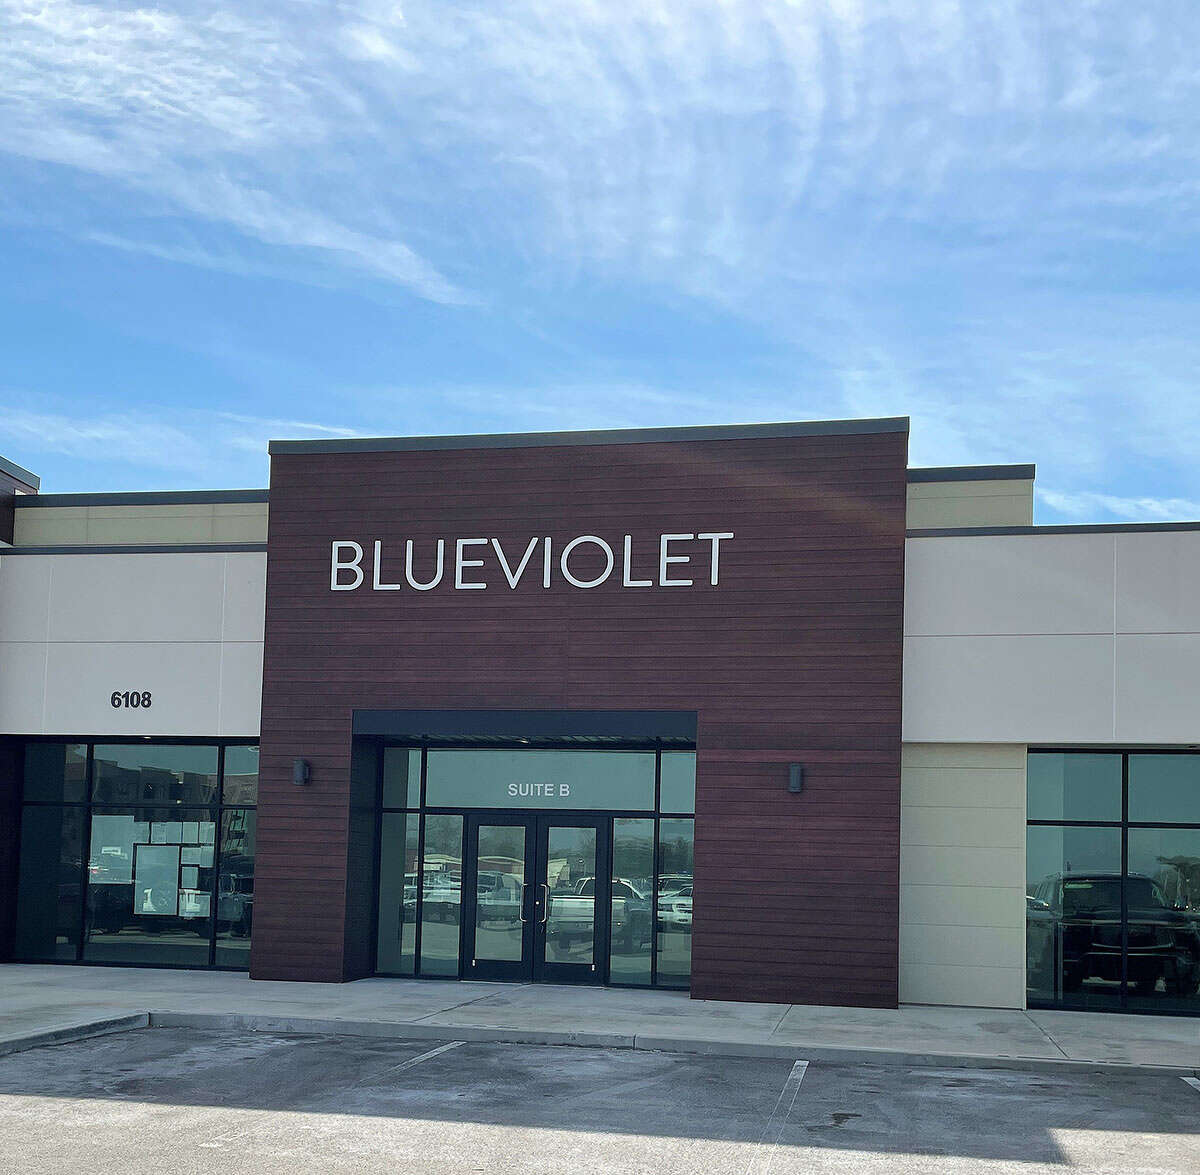 Blue Violet is slated to open in late March in Trace on the Parkway. It is located next to Water Sweets Soaps.